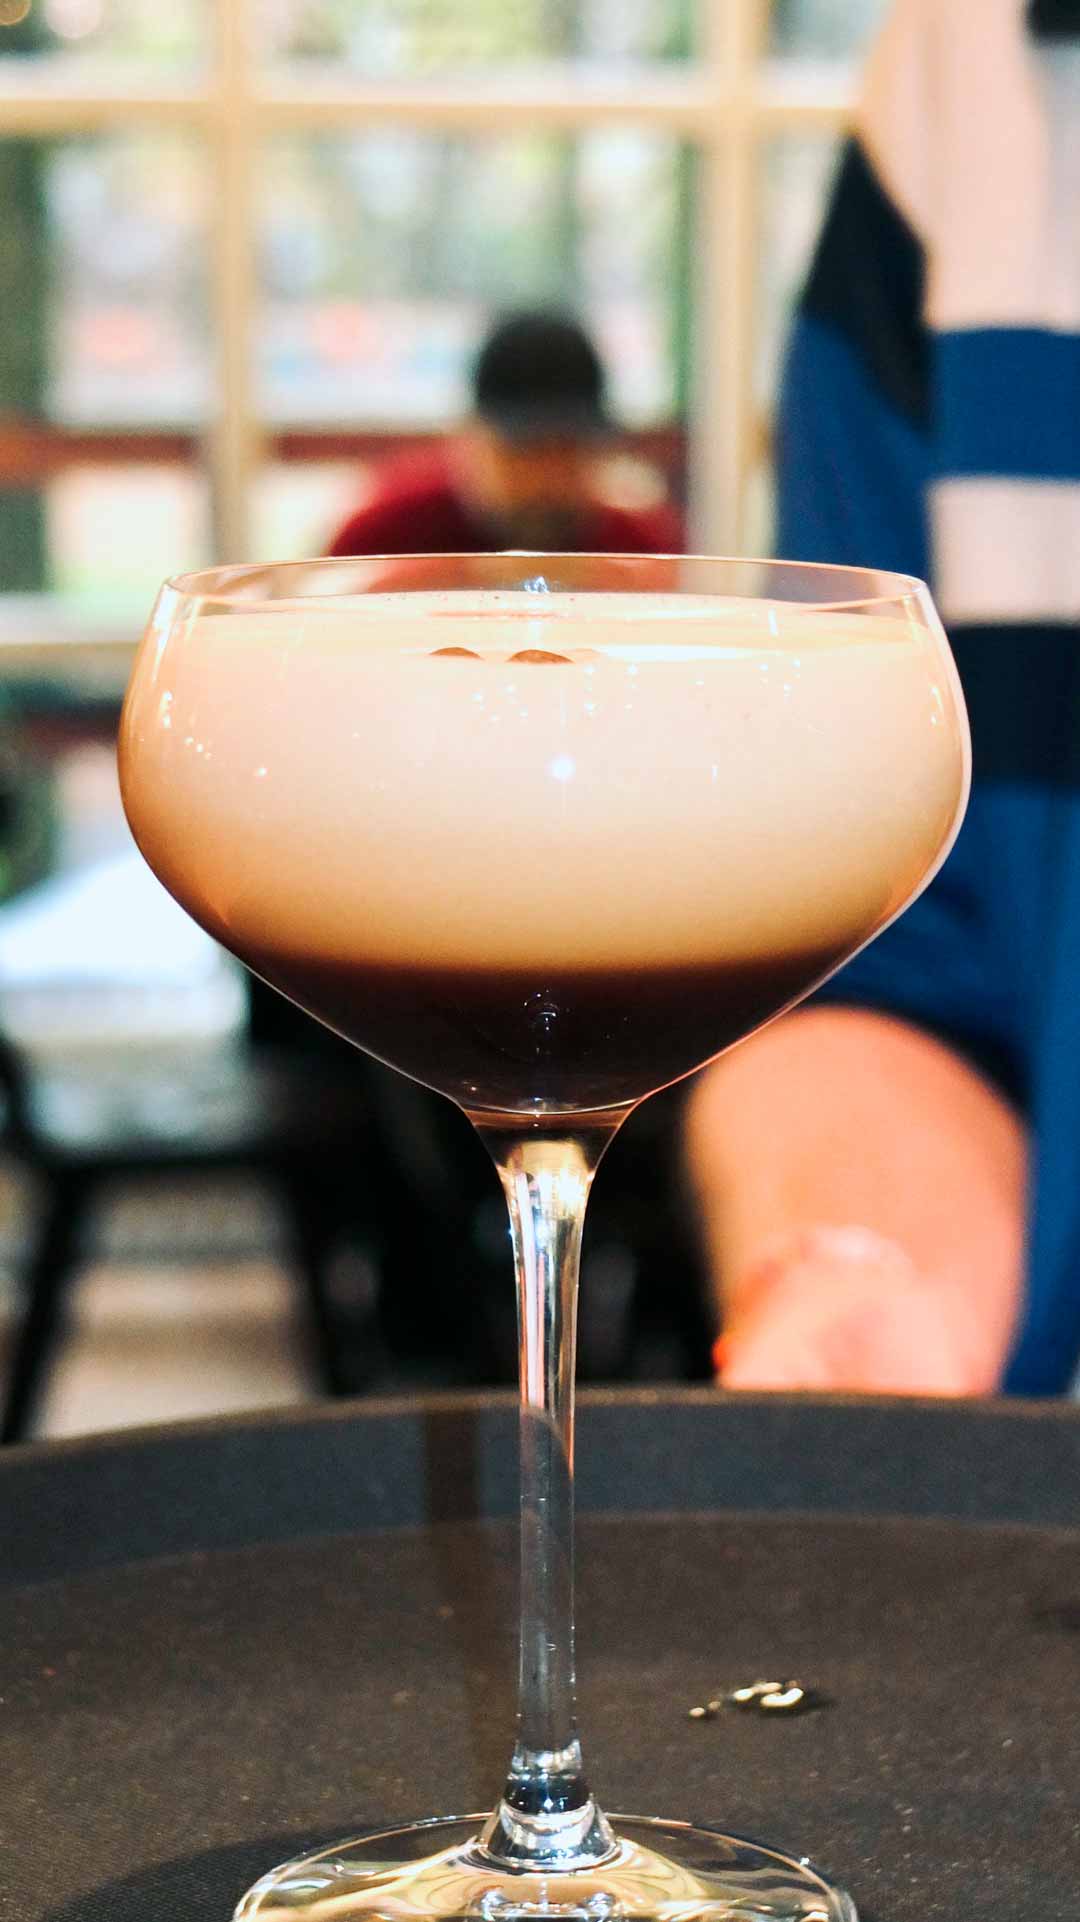 The best and foamiest Espresso Martini you can get in West Berlin